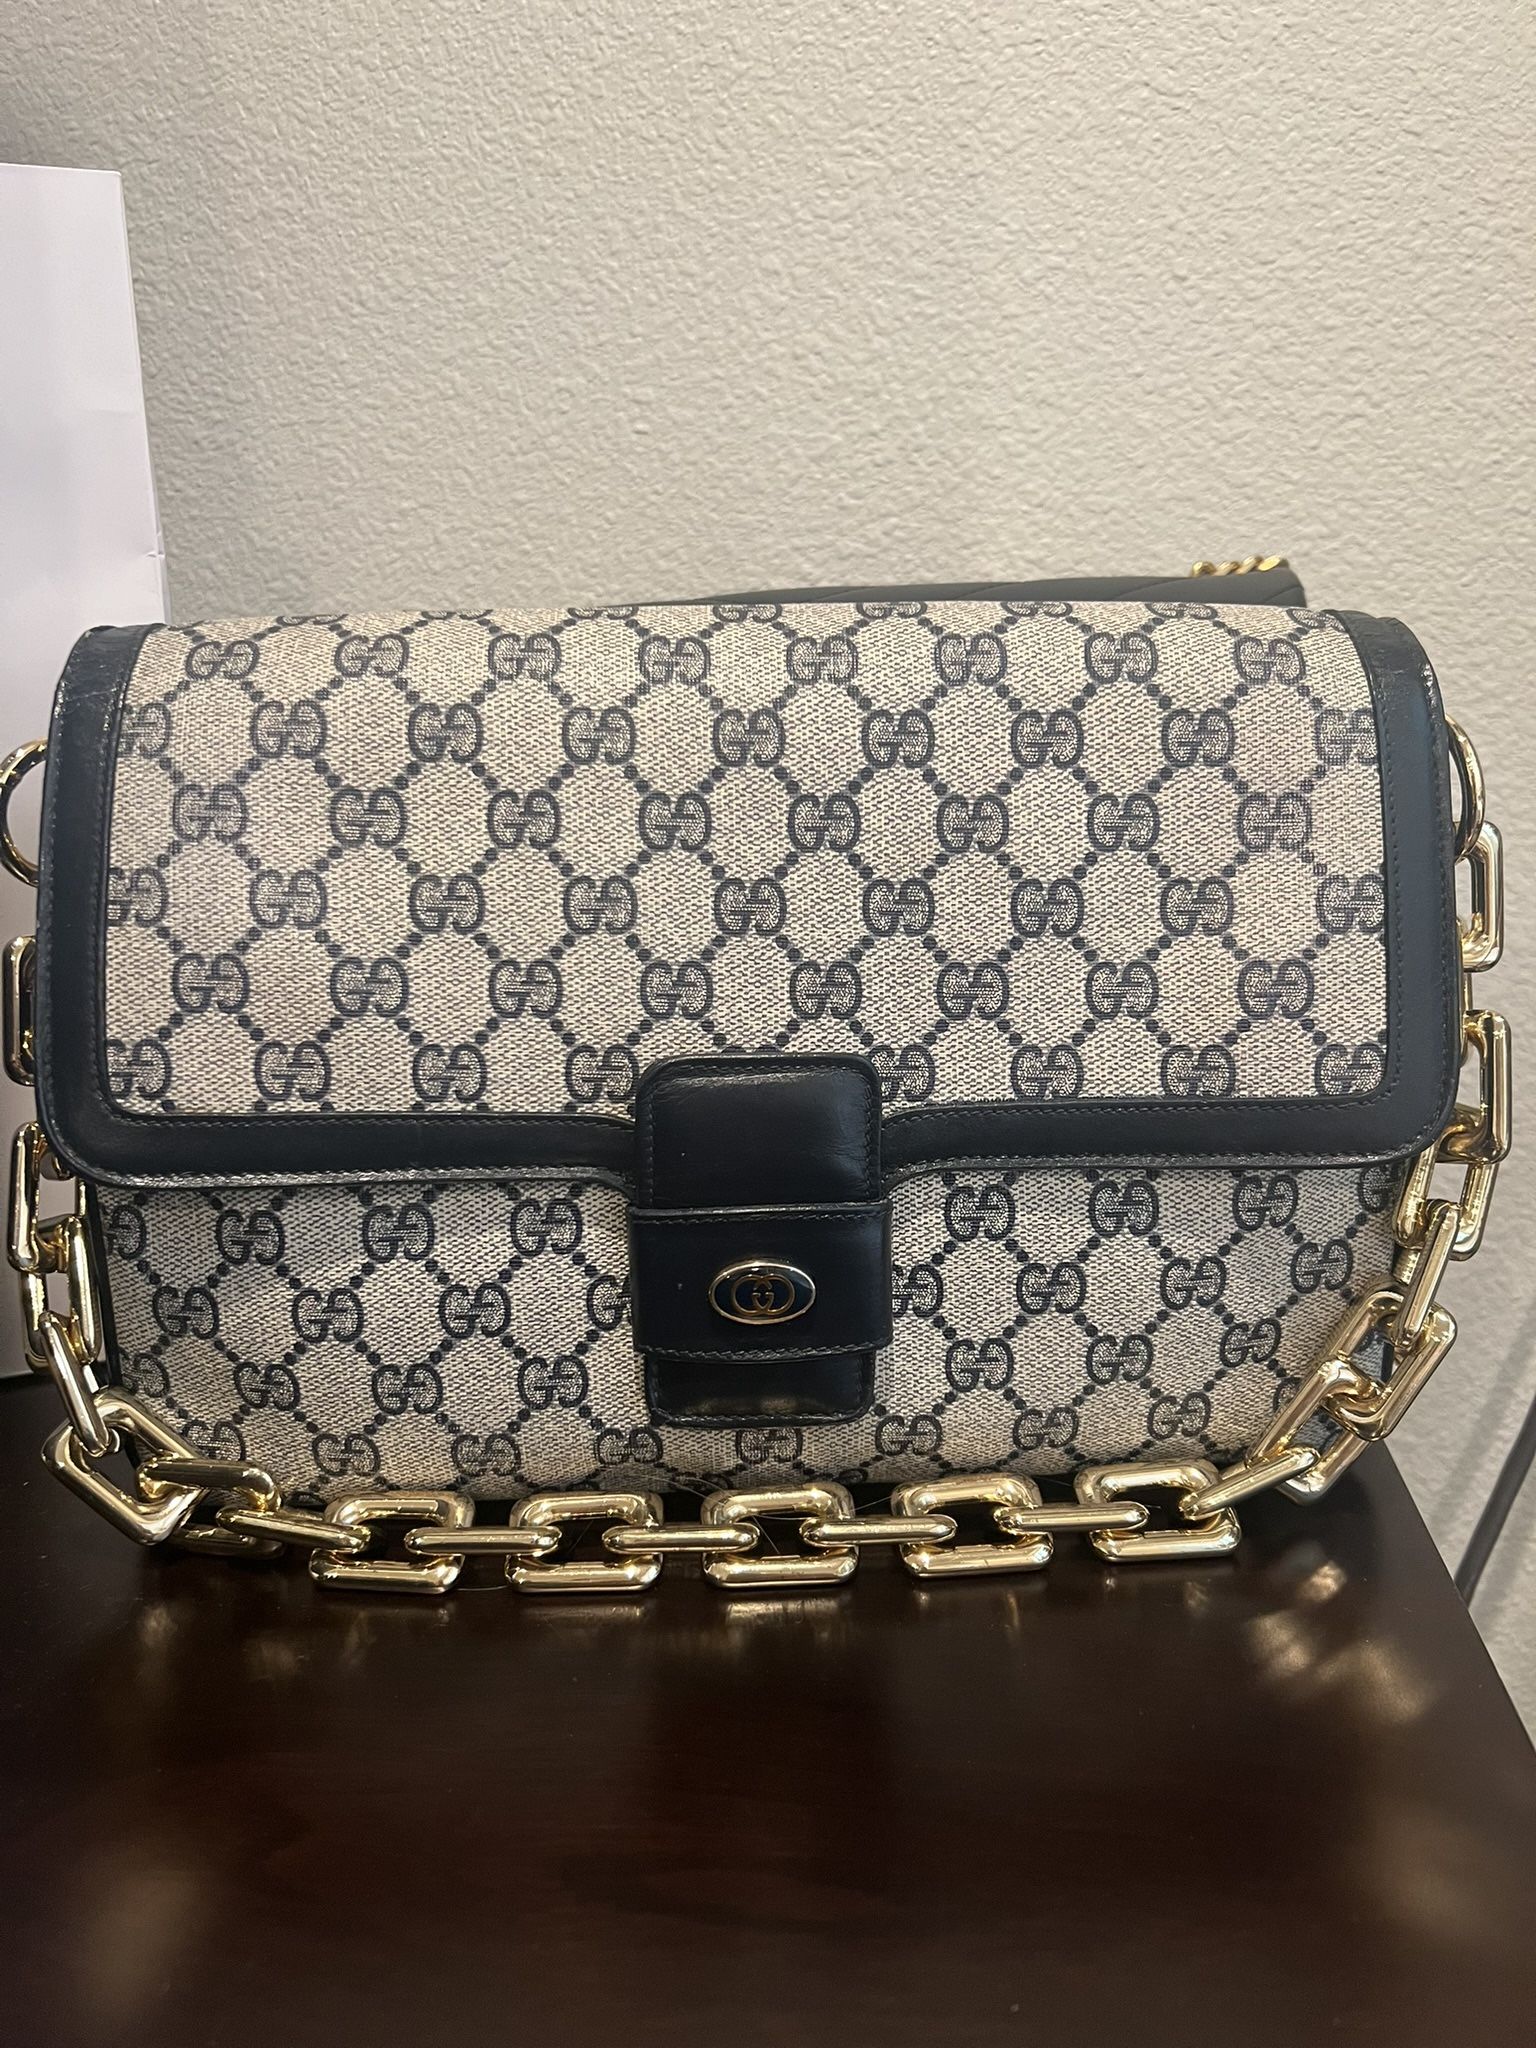 Vintage Gucci Bag With Custom Chain 